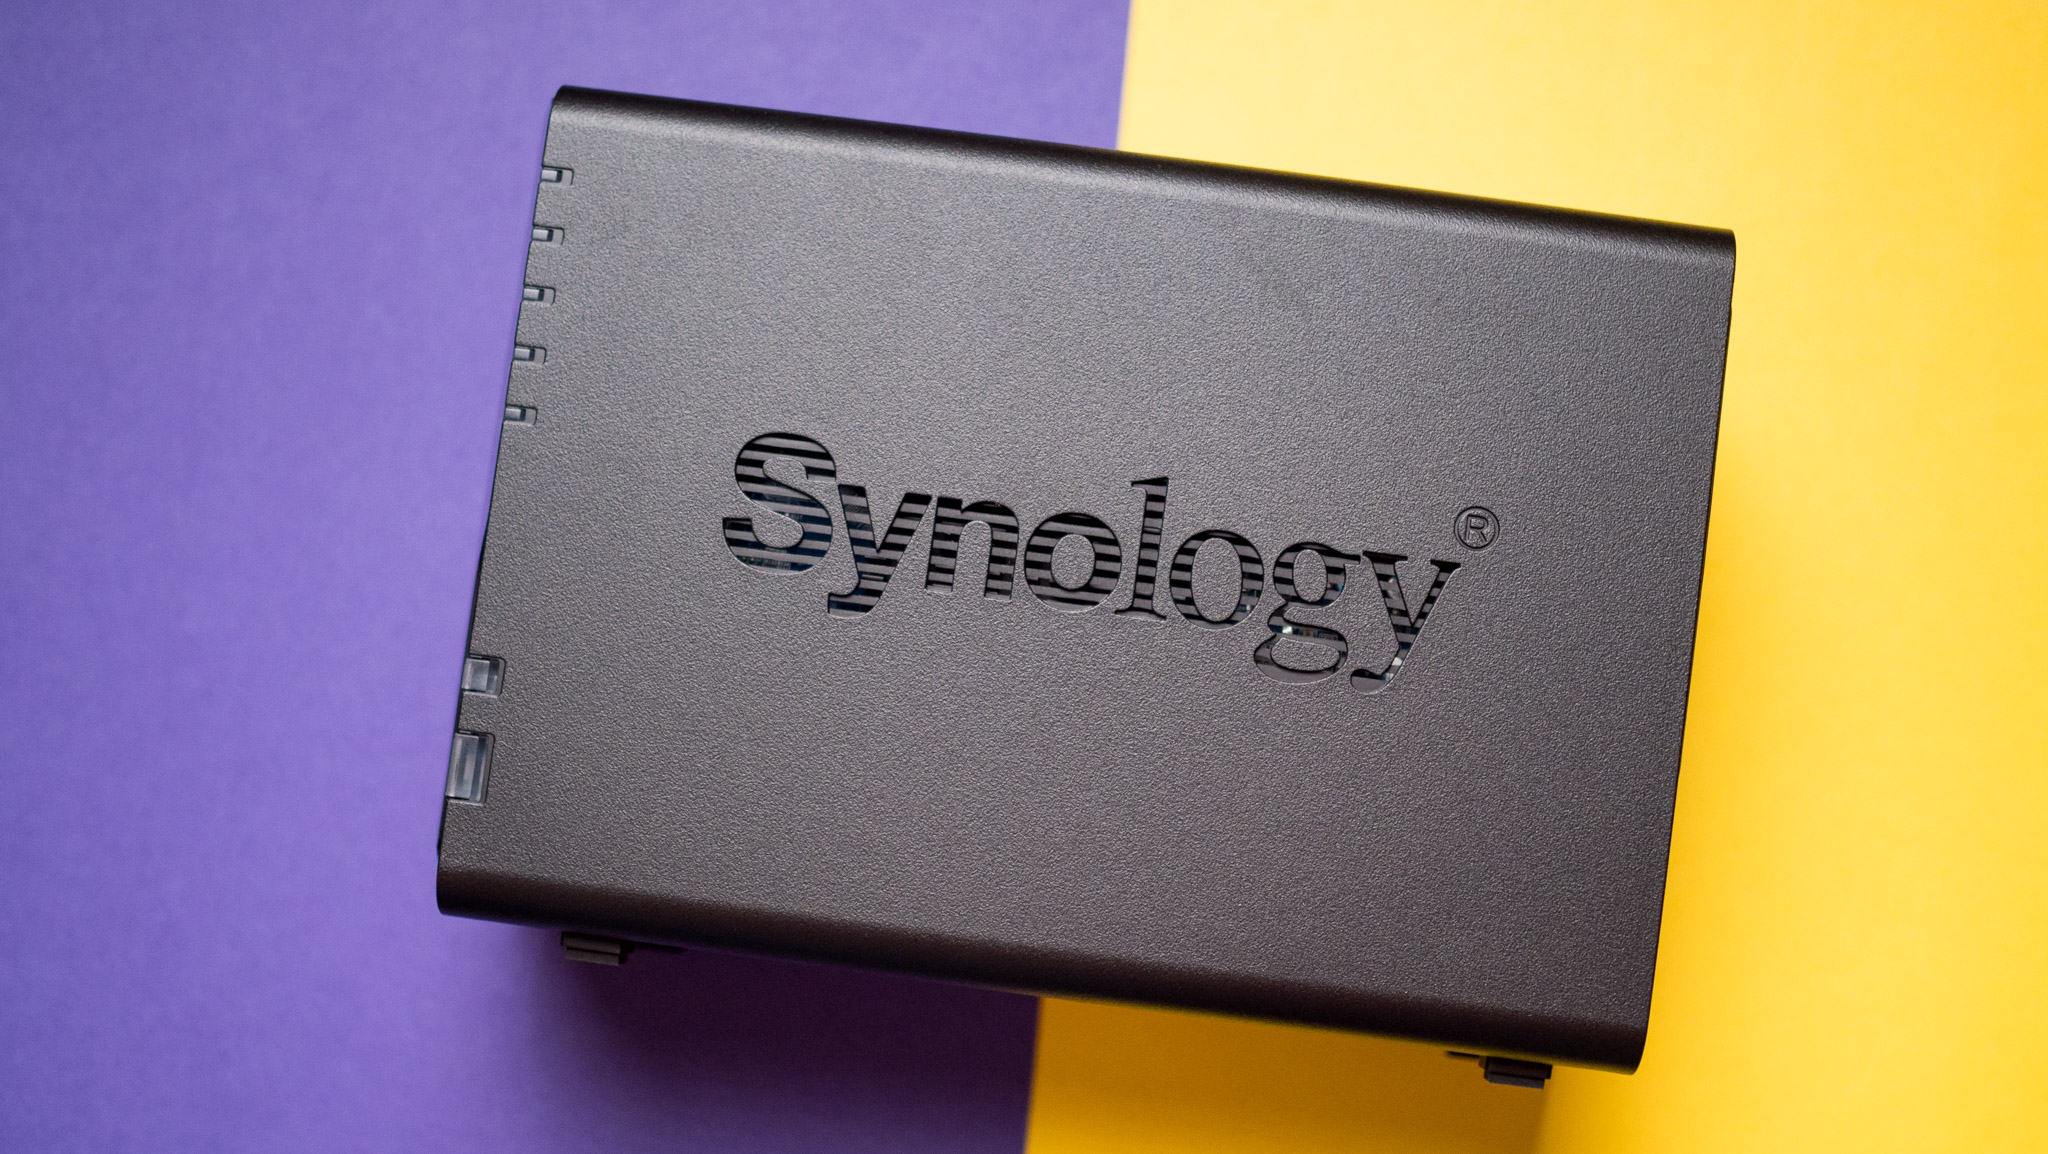 Synology DiskStation DS224+ review